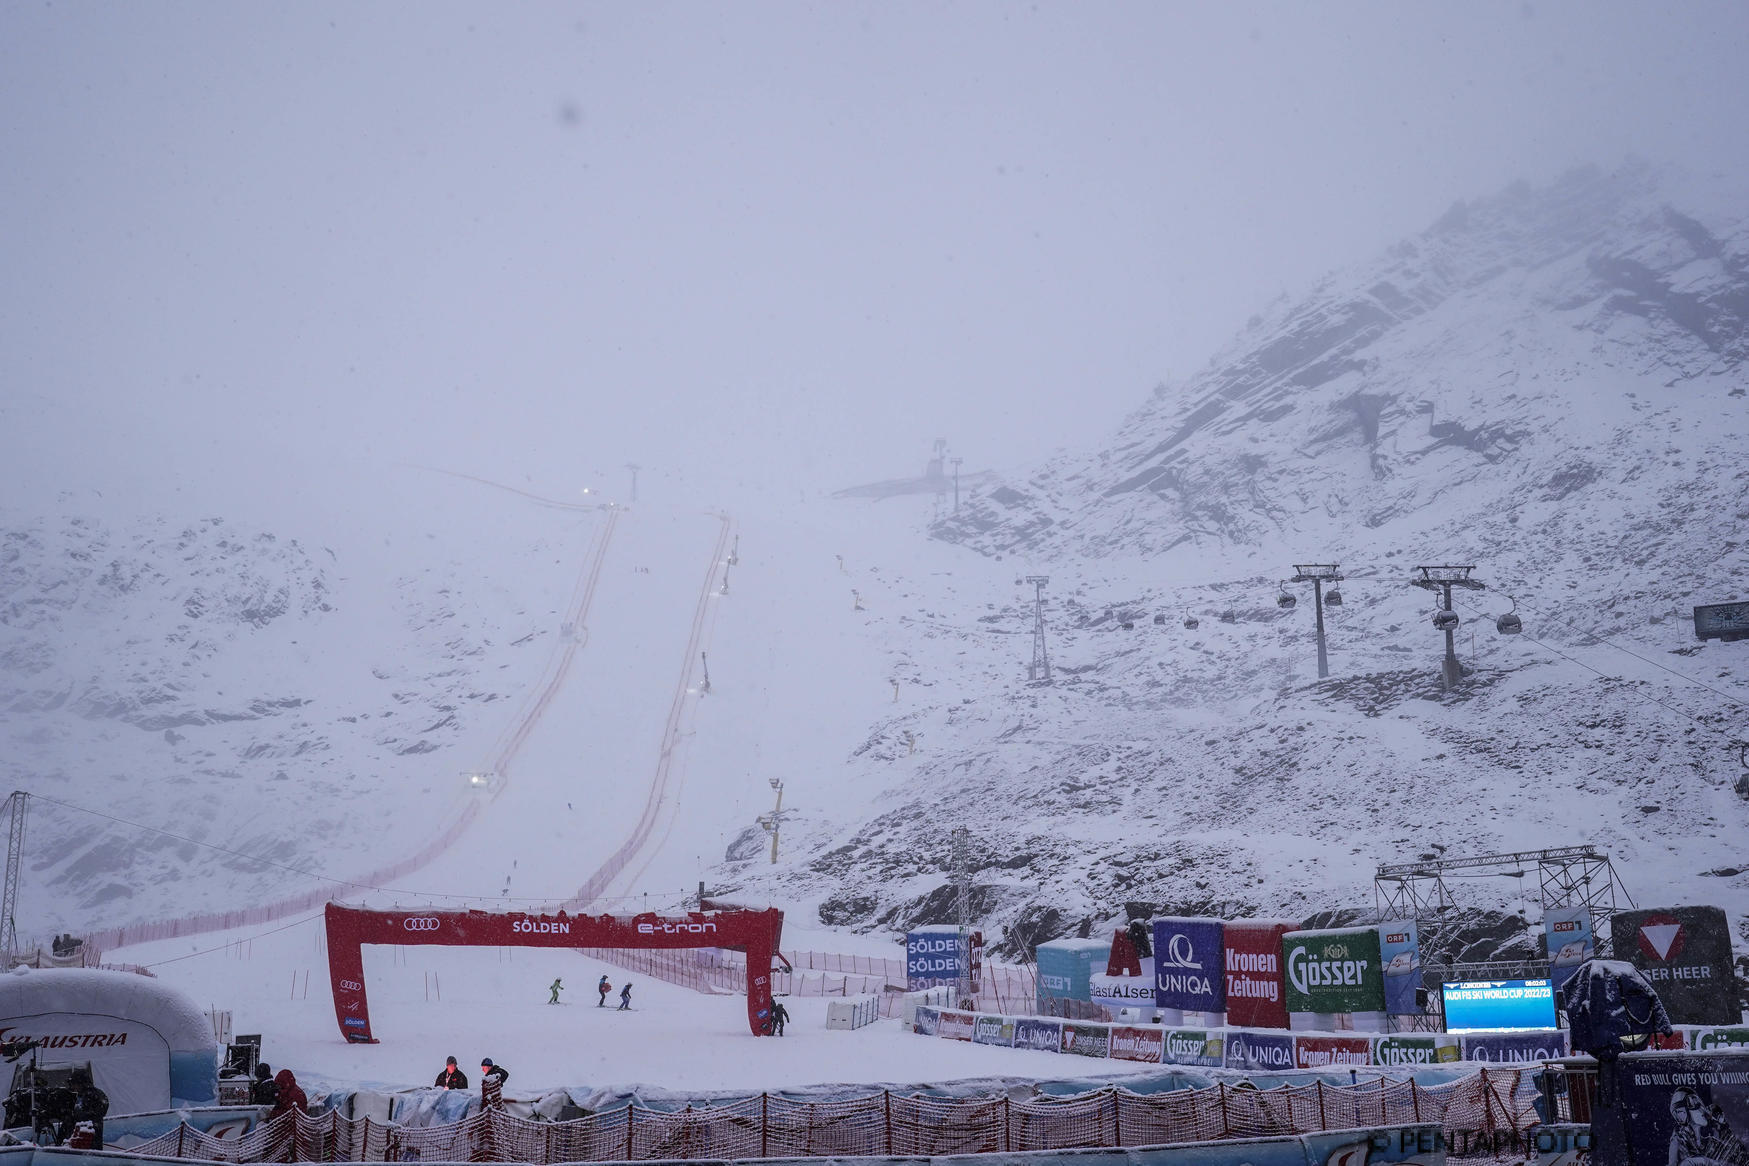 Fis Ski World Cup 2022-2023. Soelden /AUT) - 22/10/2022 - Toda's Woman's Giant Slalom Cancelled due the bad weather condition Photo: Gio Auletta/Pentaphoto